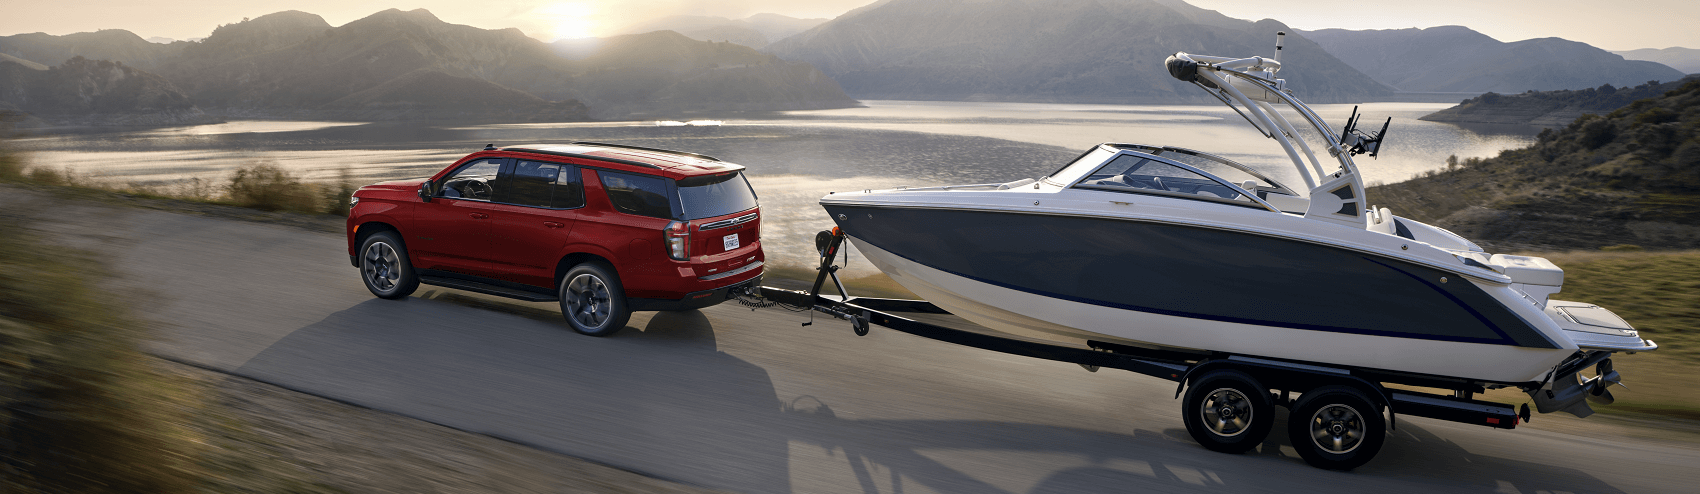 red chevy SUV towing boat along lakeside river